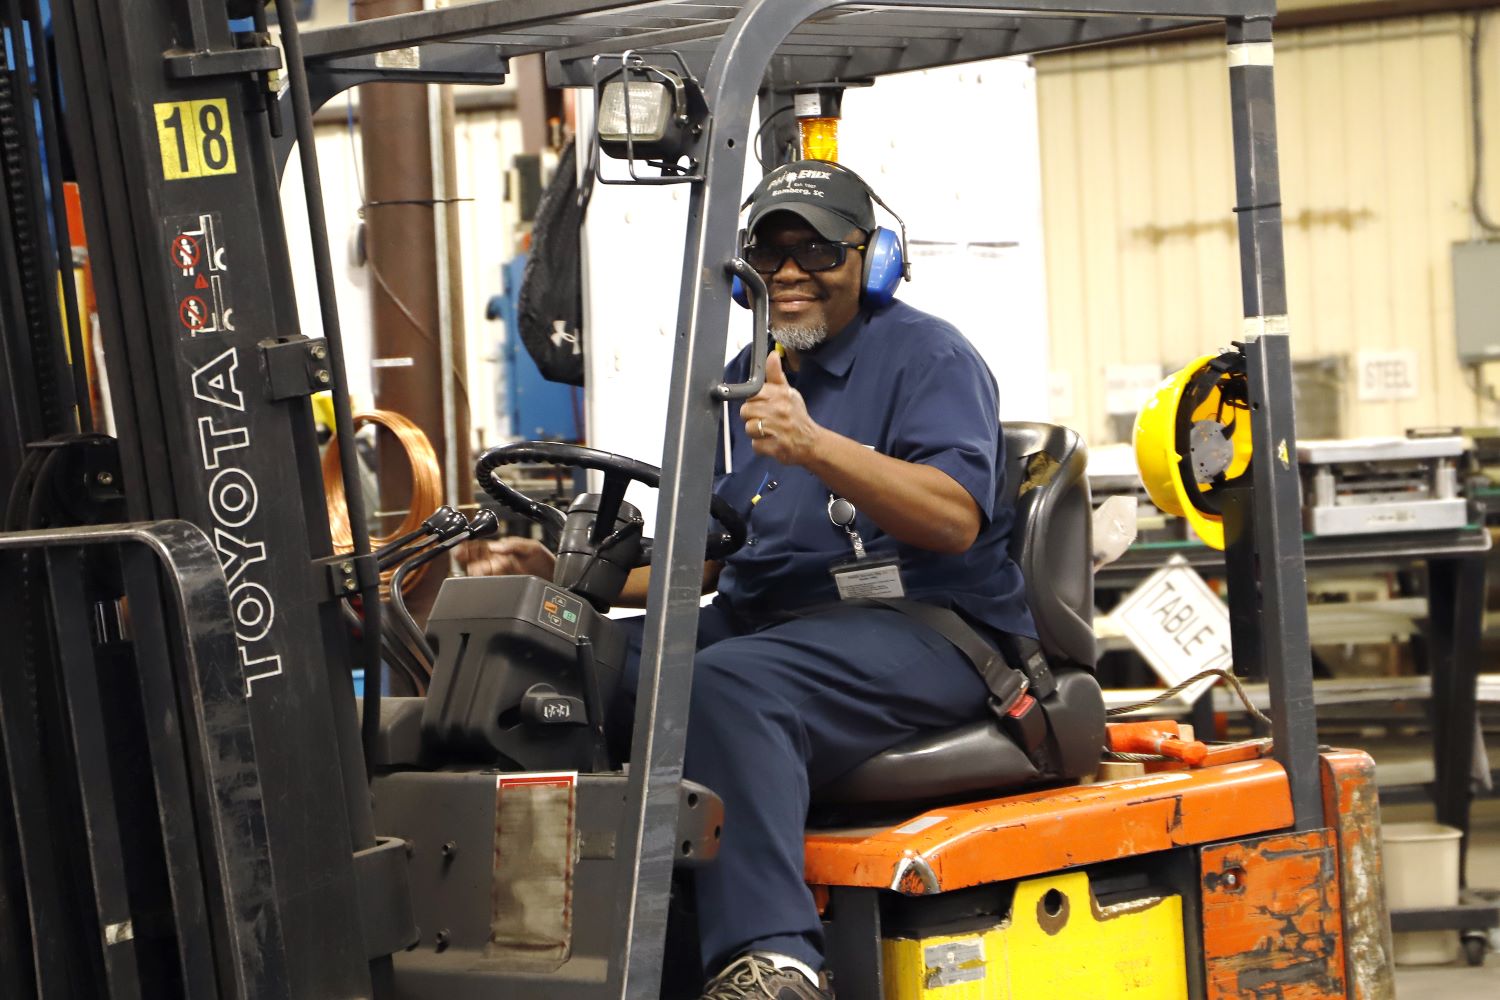 Phoenix Specialty Mfg. Co. staff member giving thumbs up to camera as he operates a forklift